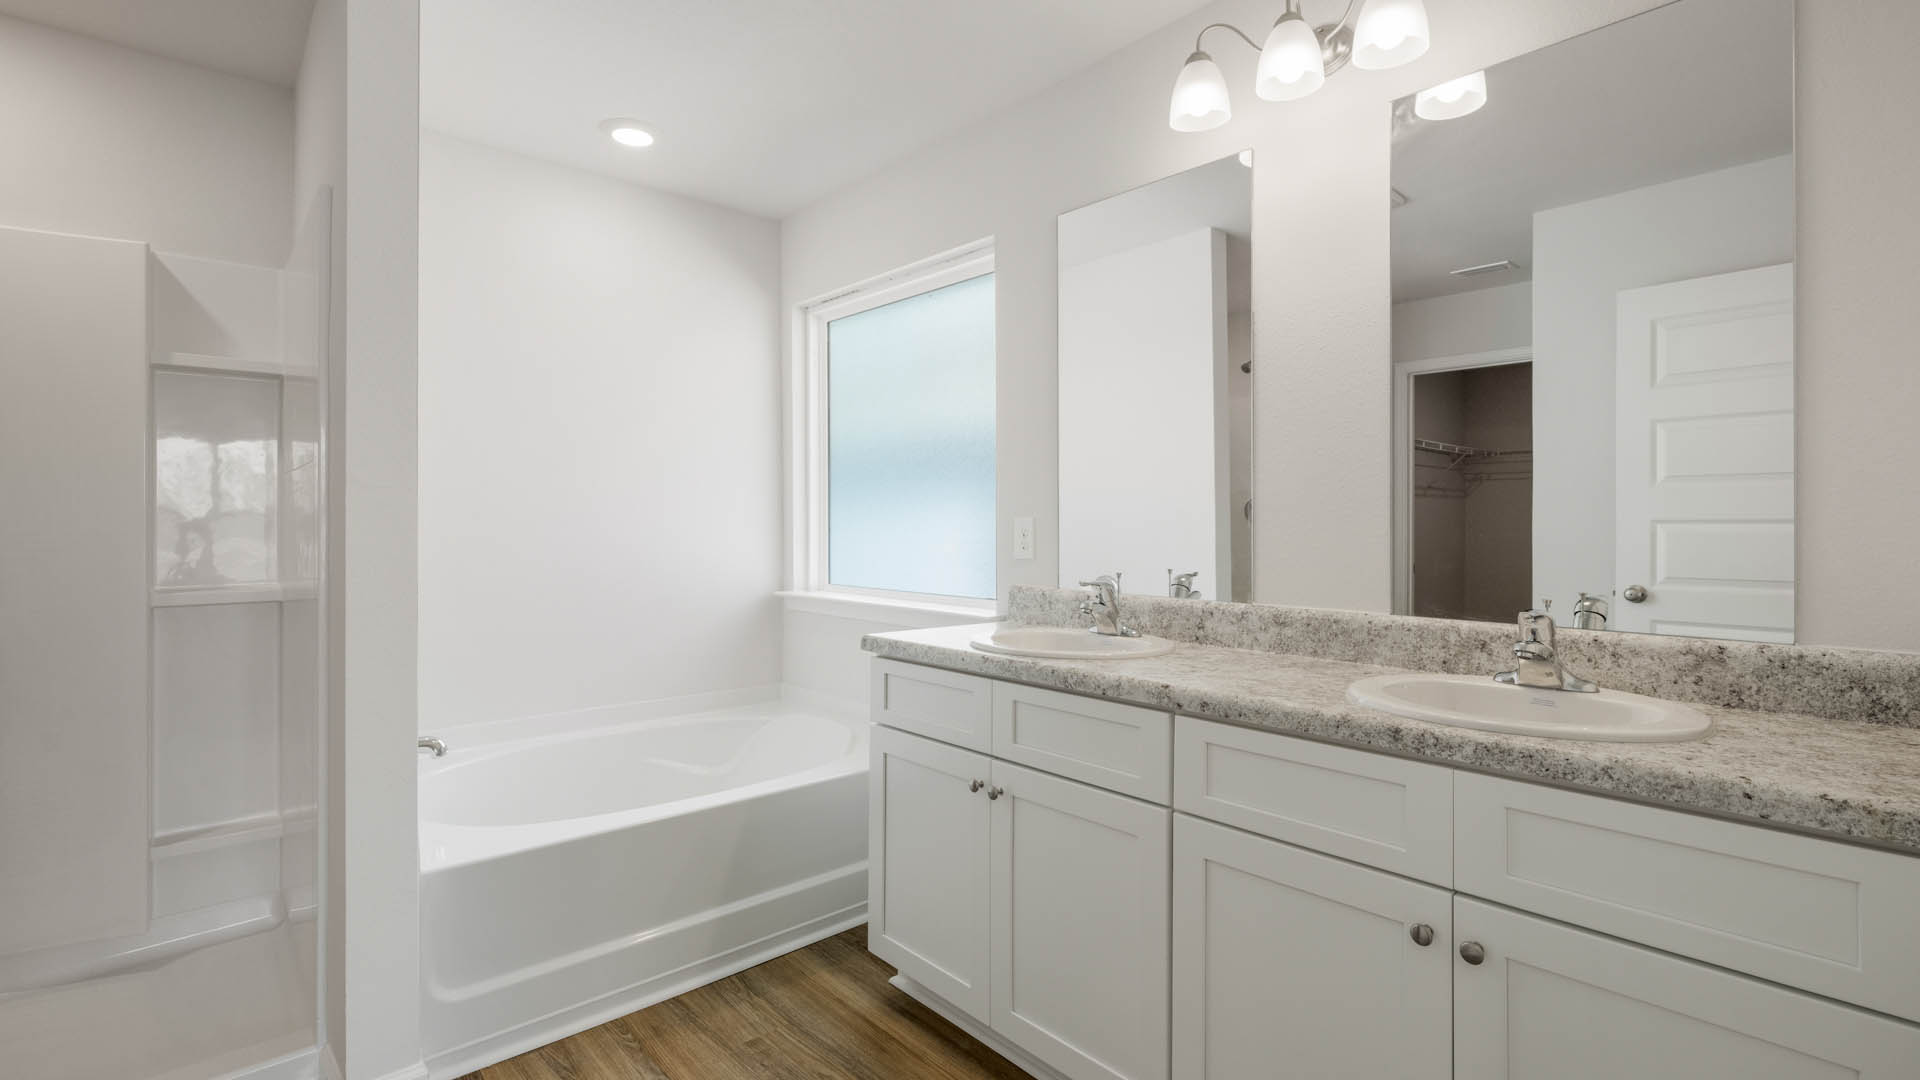 Primary bathroom with laminate countertops and double vanity and tub.